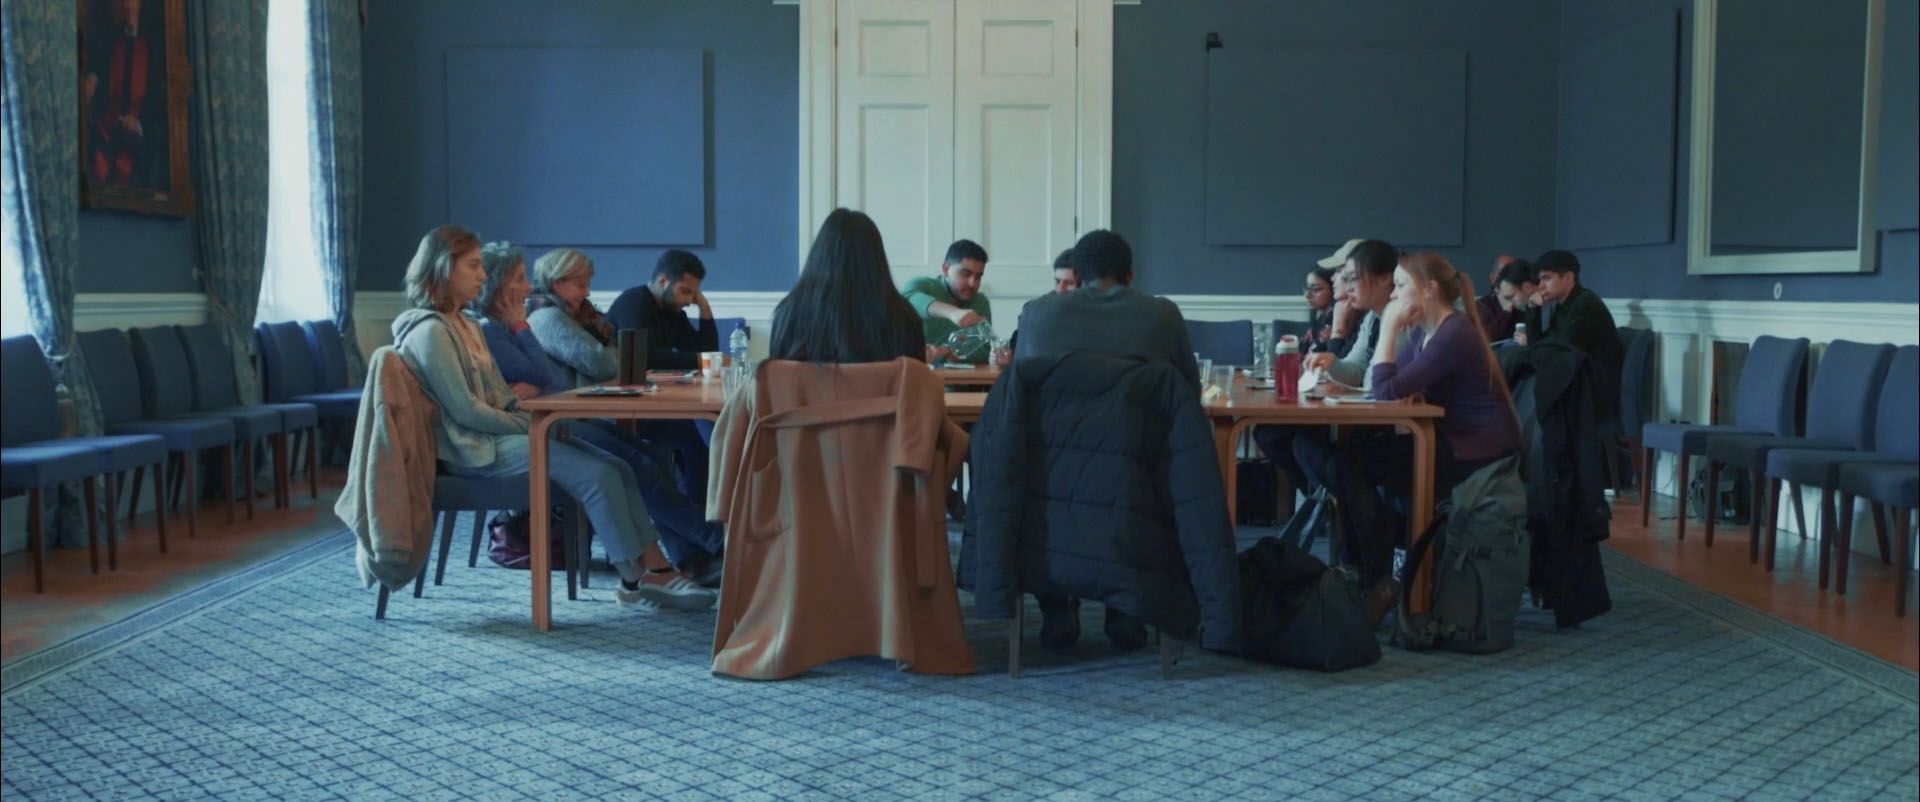 In making The Justice Syndicate, Fast Familiar thought carefully about the ethics of interactive theatre. Here, a theatre audience of twelve people sit around a table in a grand-looking room.